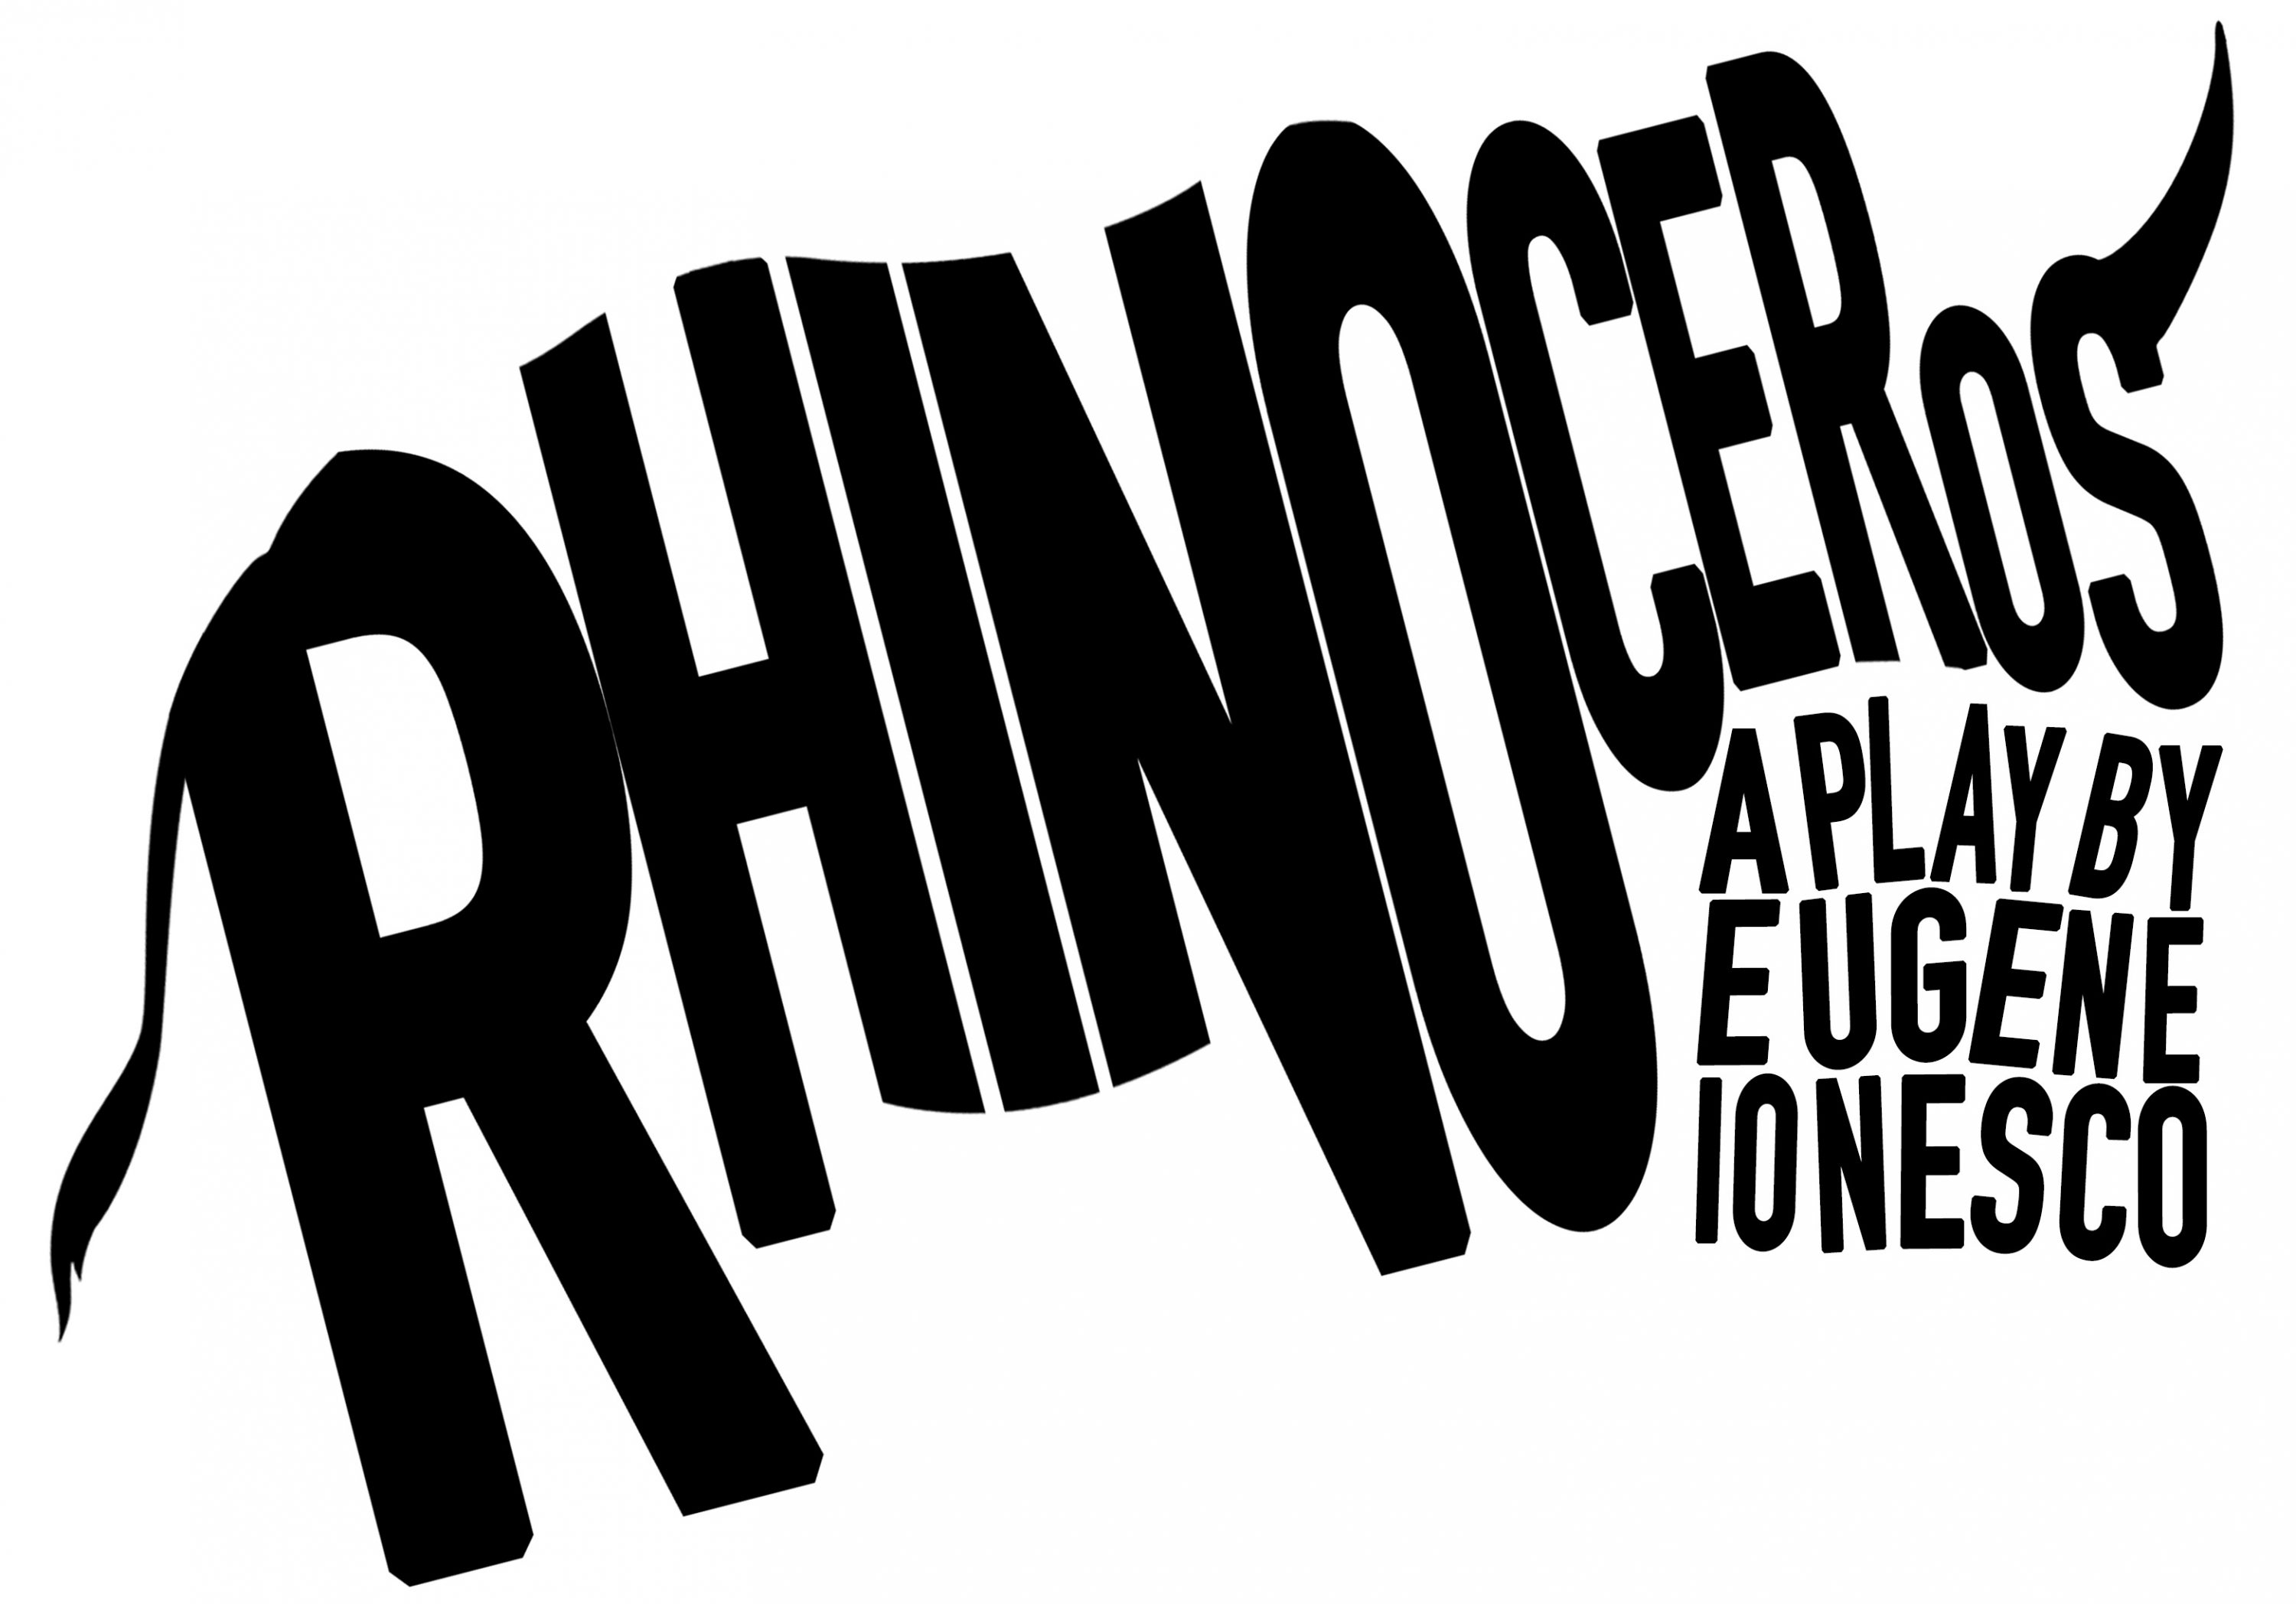 Image of a rhinoceros created with the letters rhinoceros